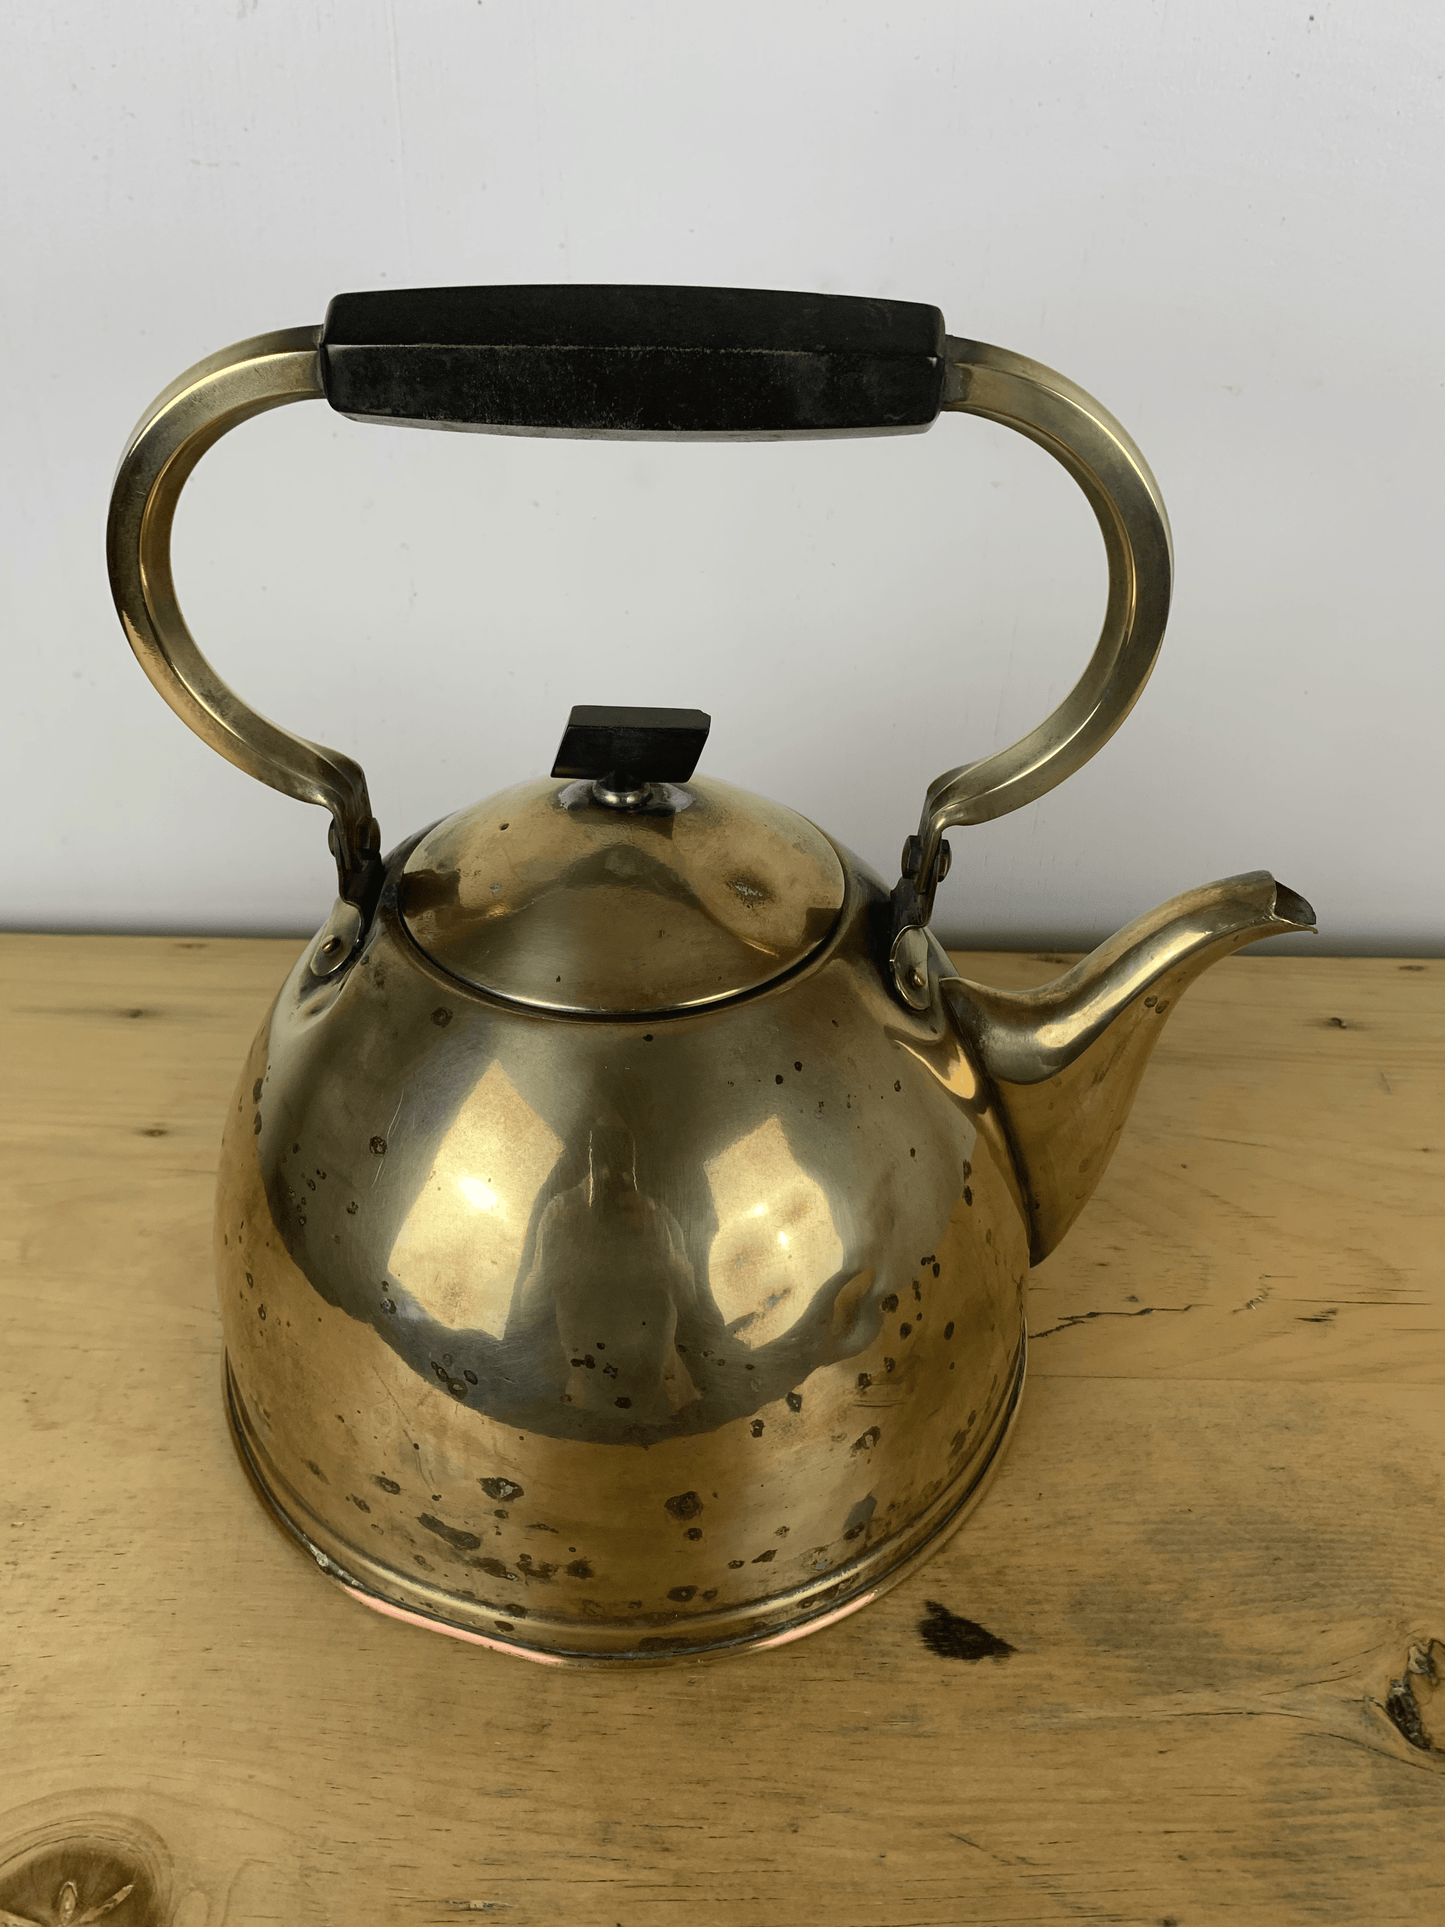 Vintage Brass Kettle: Timeless Elegance for Your Tea Rituals